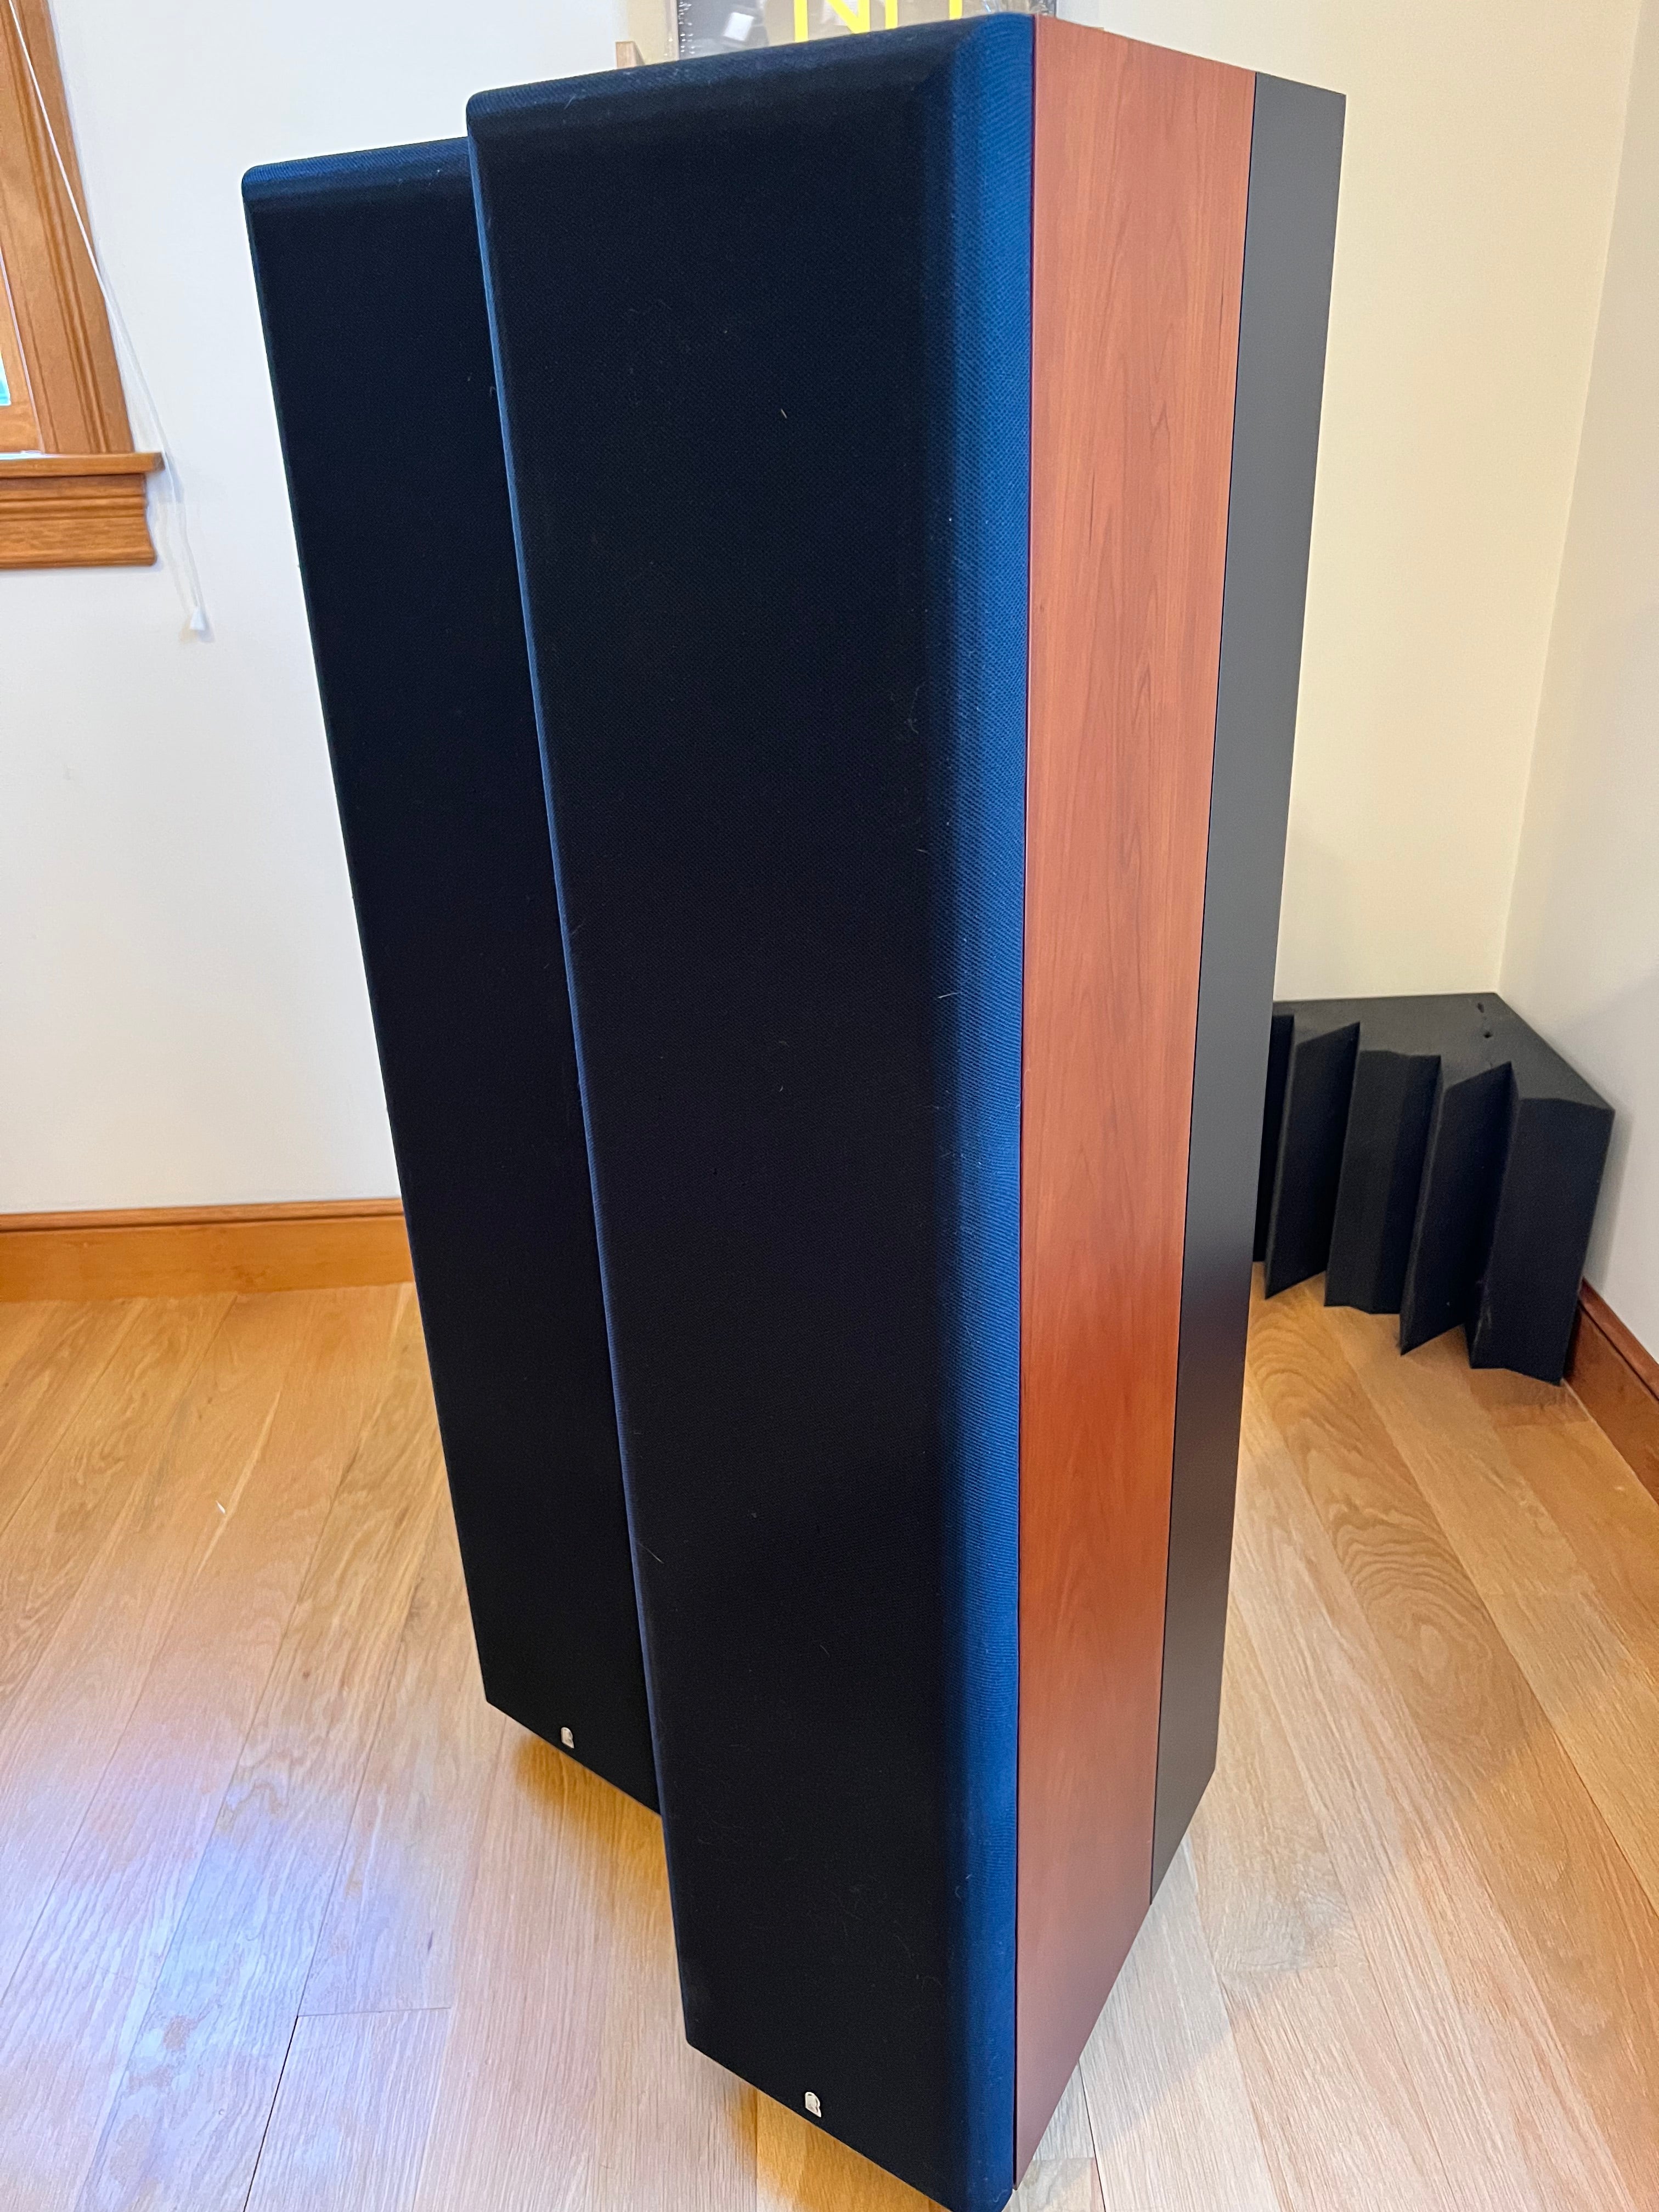 Revel Performa F32 Speakers, Wood Finish SOLD – Holt Hill